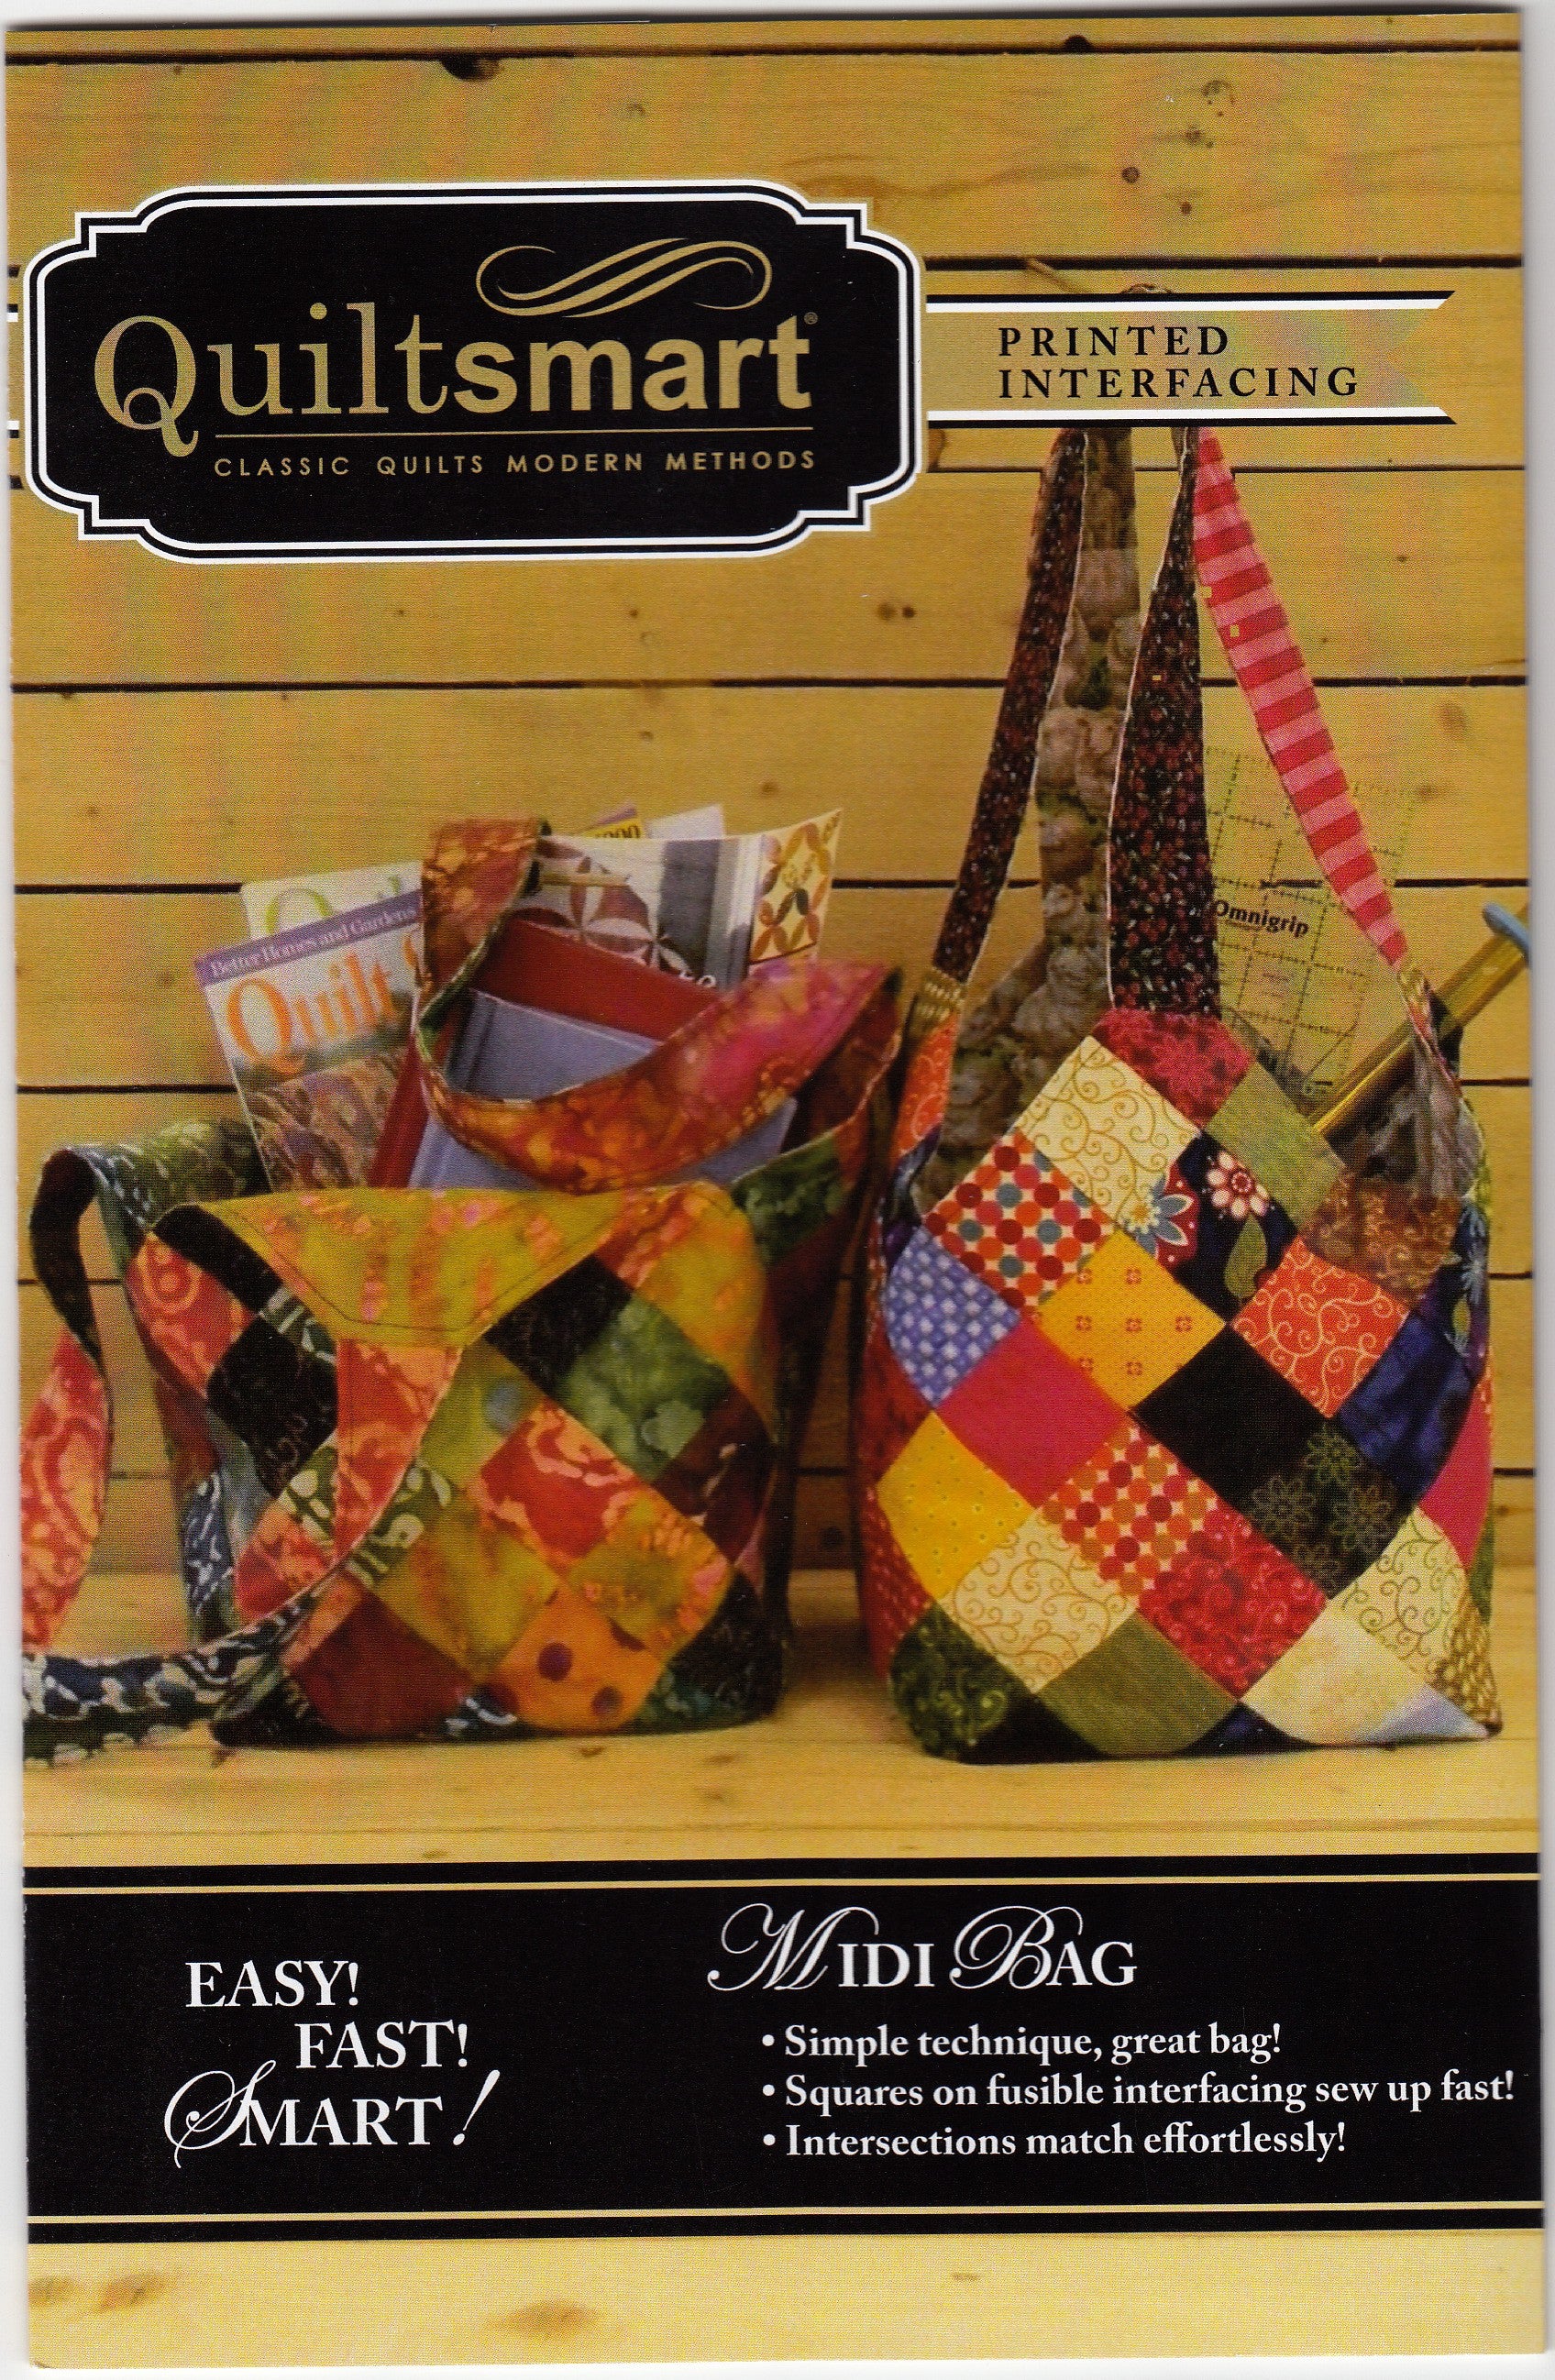 Midi Bag Fun Pack - Pattern And Printed Interfacing By Quiltsmart